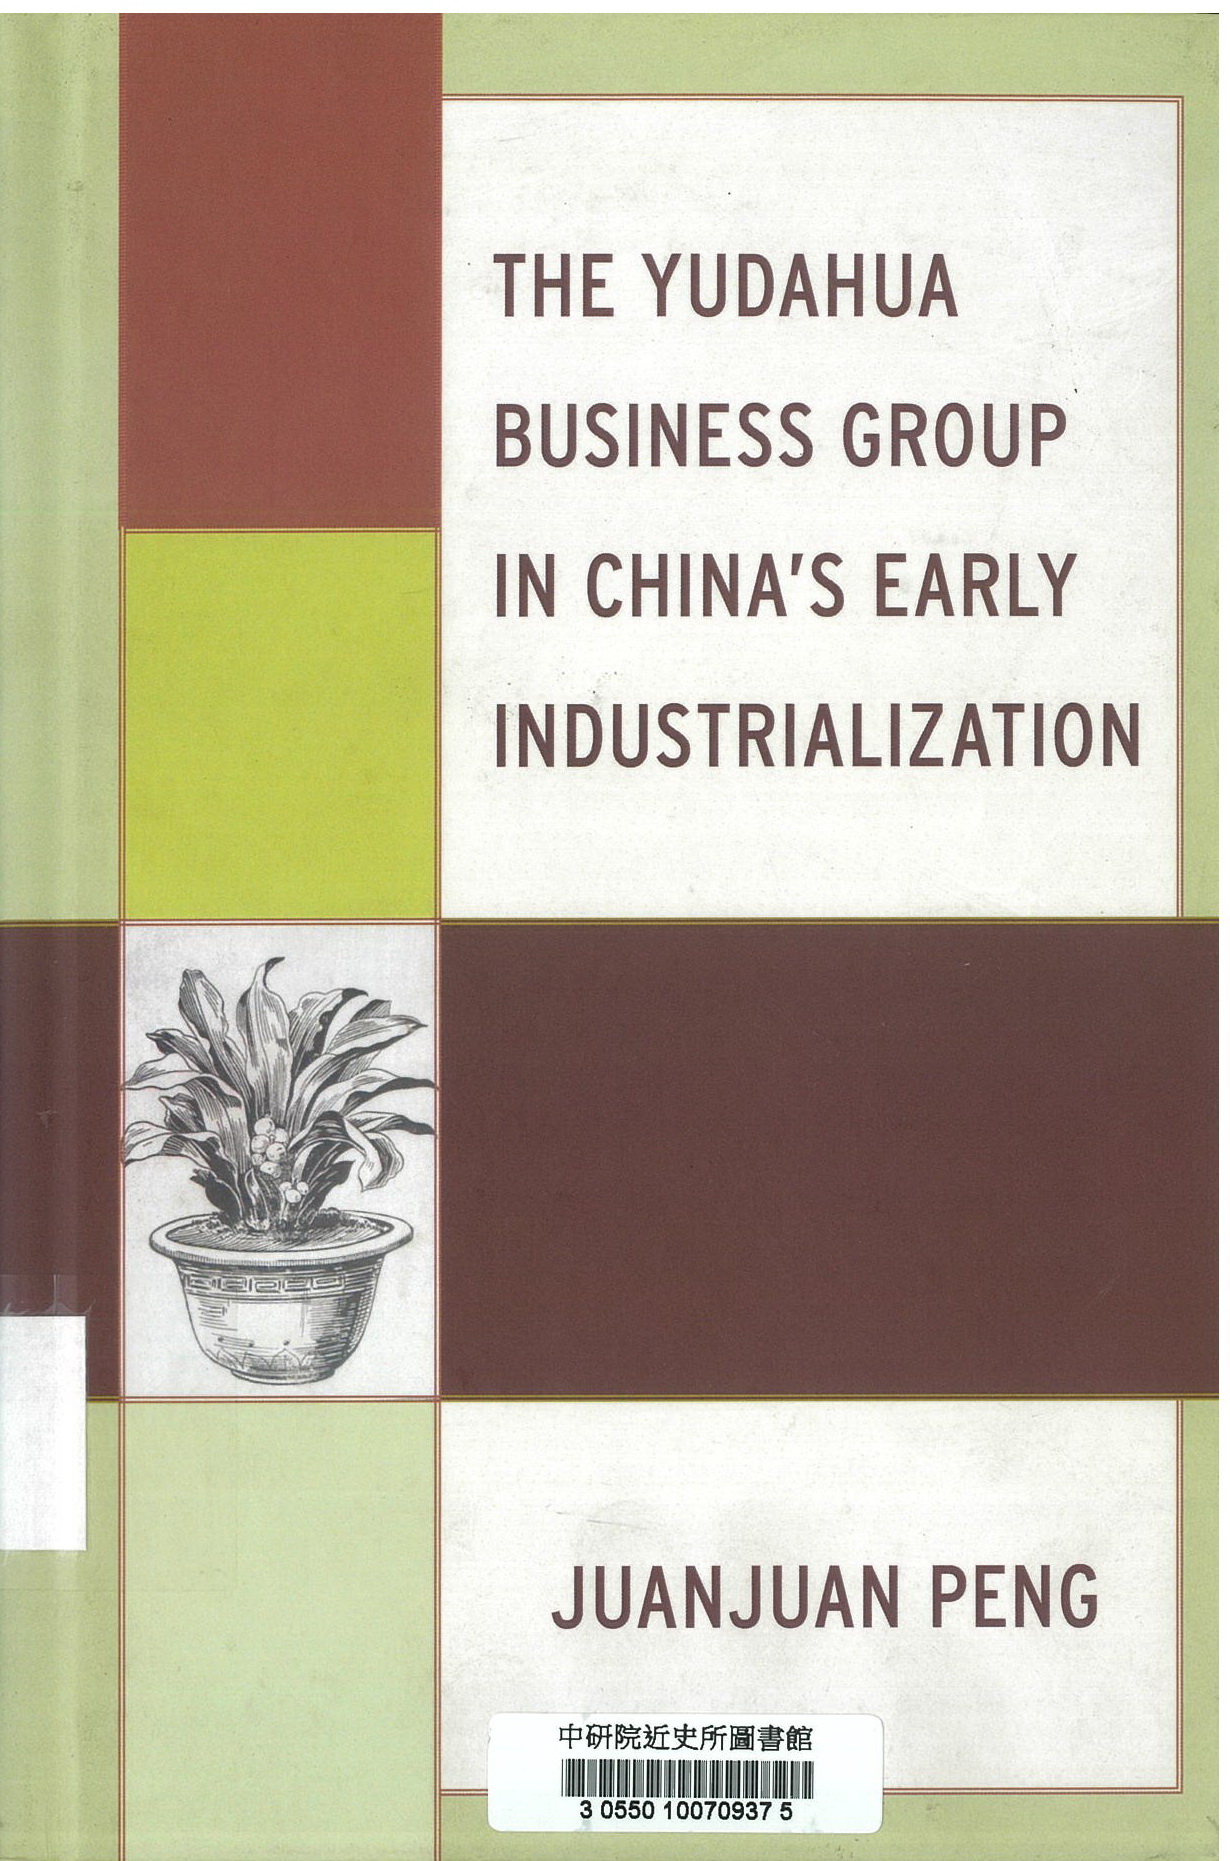 The Yudahua Business Group in China's early industrialization